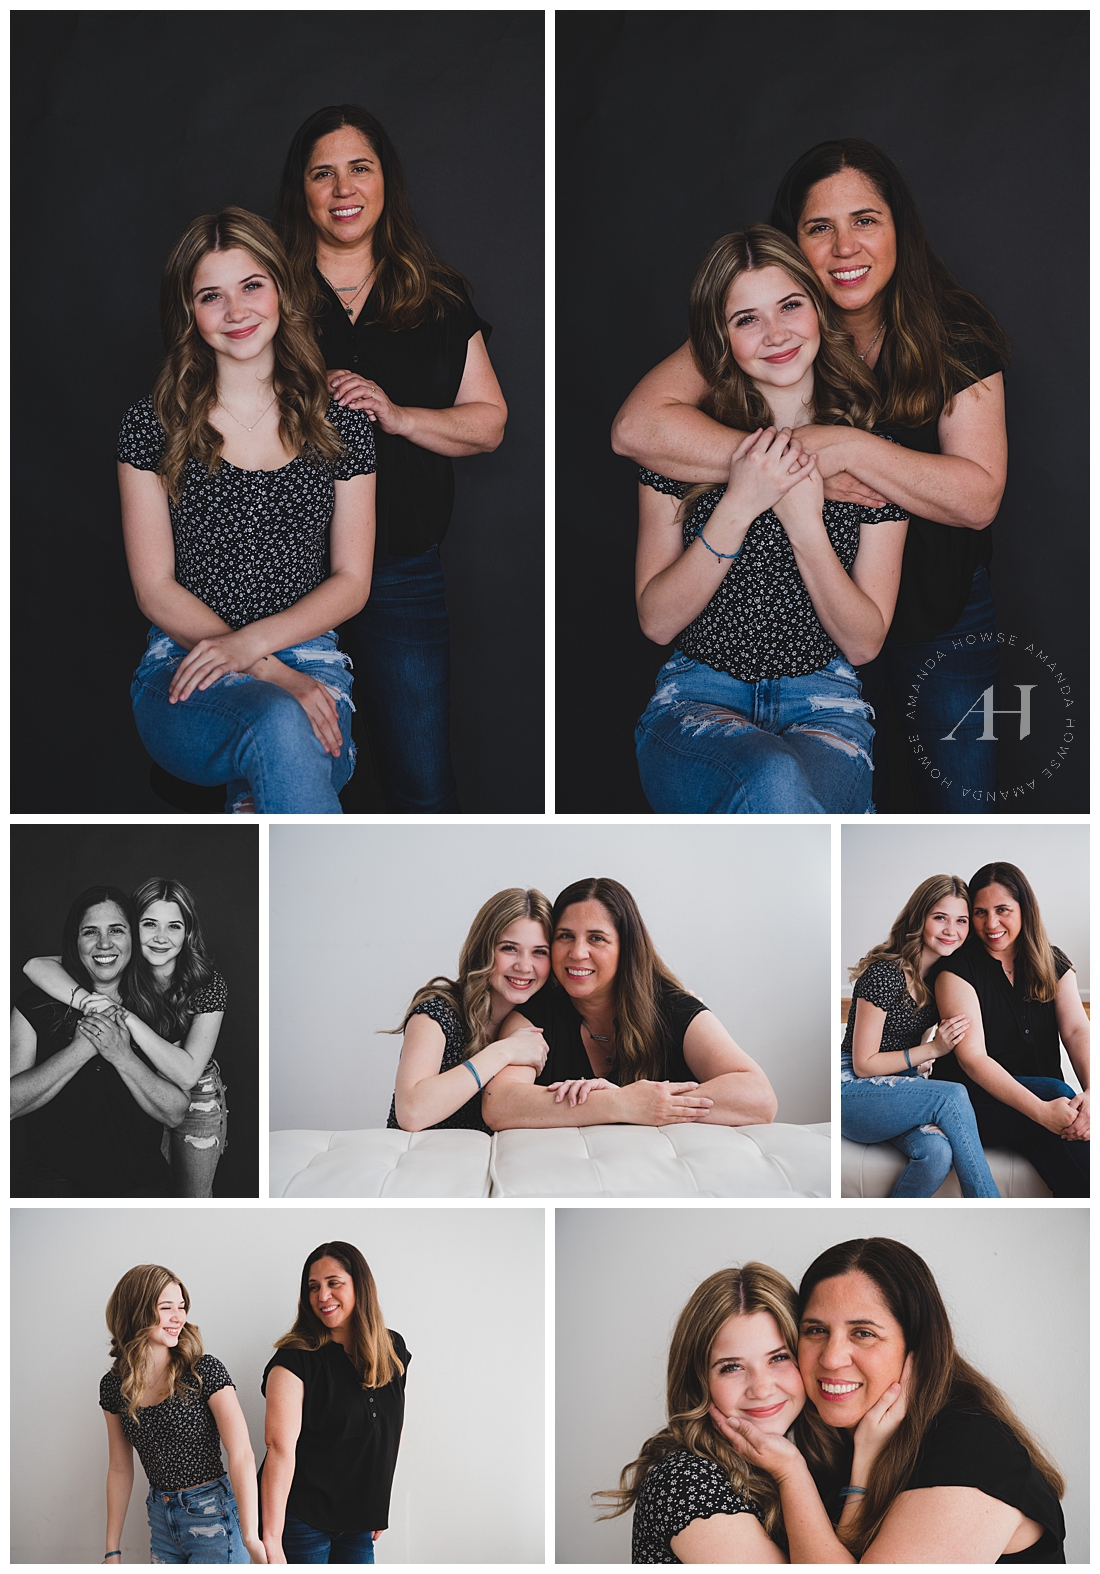 Mother's Day Photoshoot Ideas in Tacoma | Cute Poses For Mom and Daughter | Photographed by the Best Tacoma Washington Senior Photographer Amanda Howse Photography